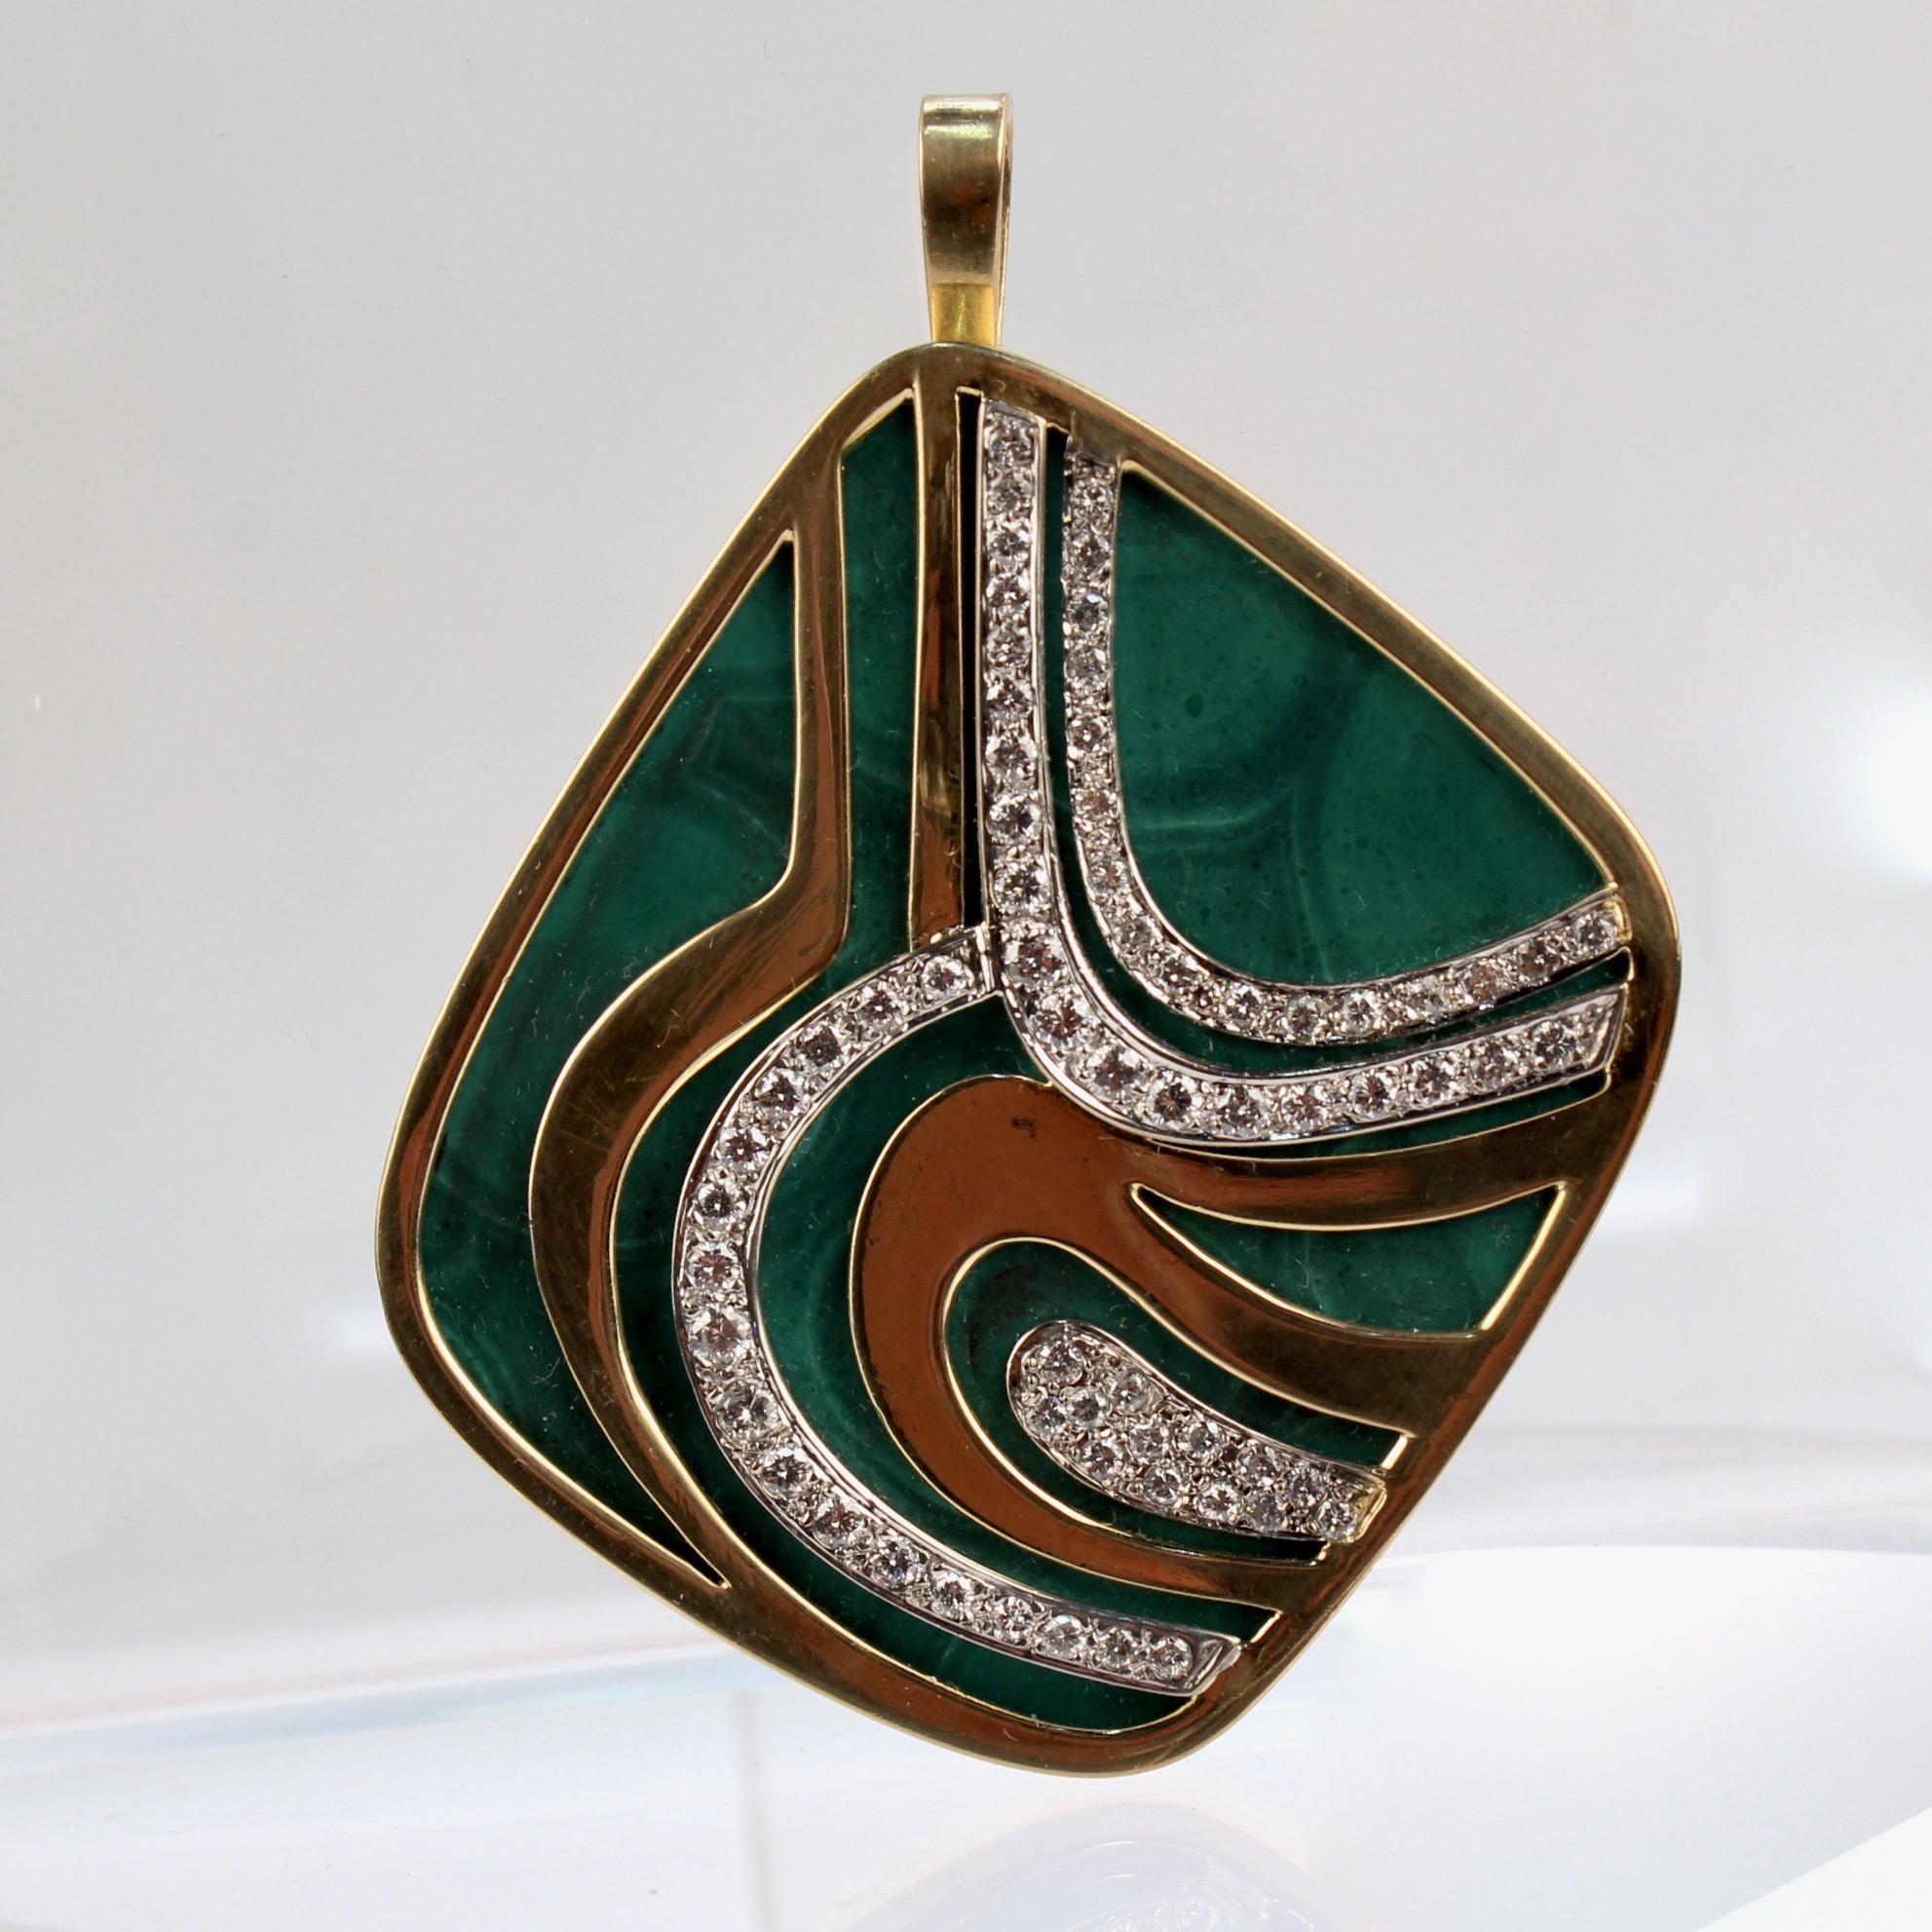 A very fine Swiss modernist 18k gold, diamond, and malachite pendant brooch by Weber & Cie.

With a large flat malachite cabochon bezel set in 18k gold.  

Encased by an organic pattern of three bands of yellow gold and three bands of white gold